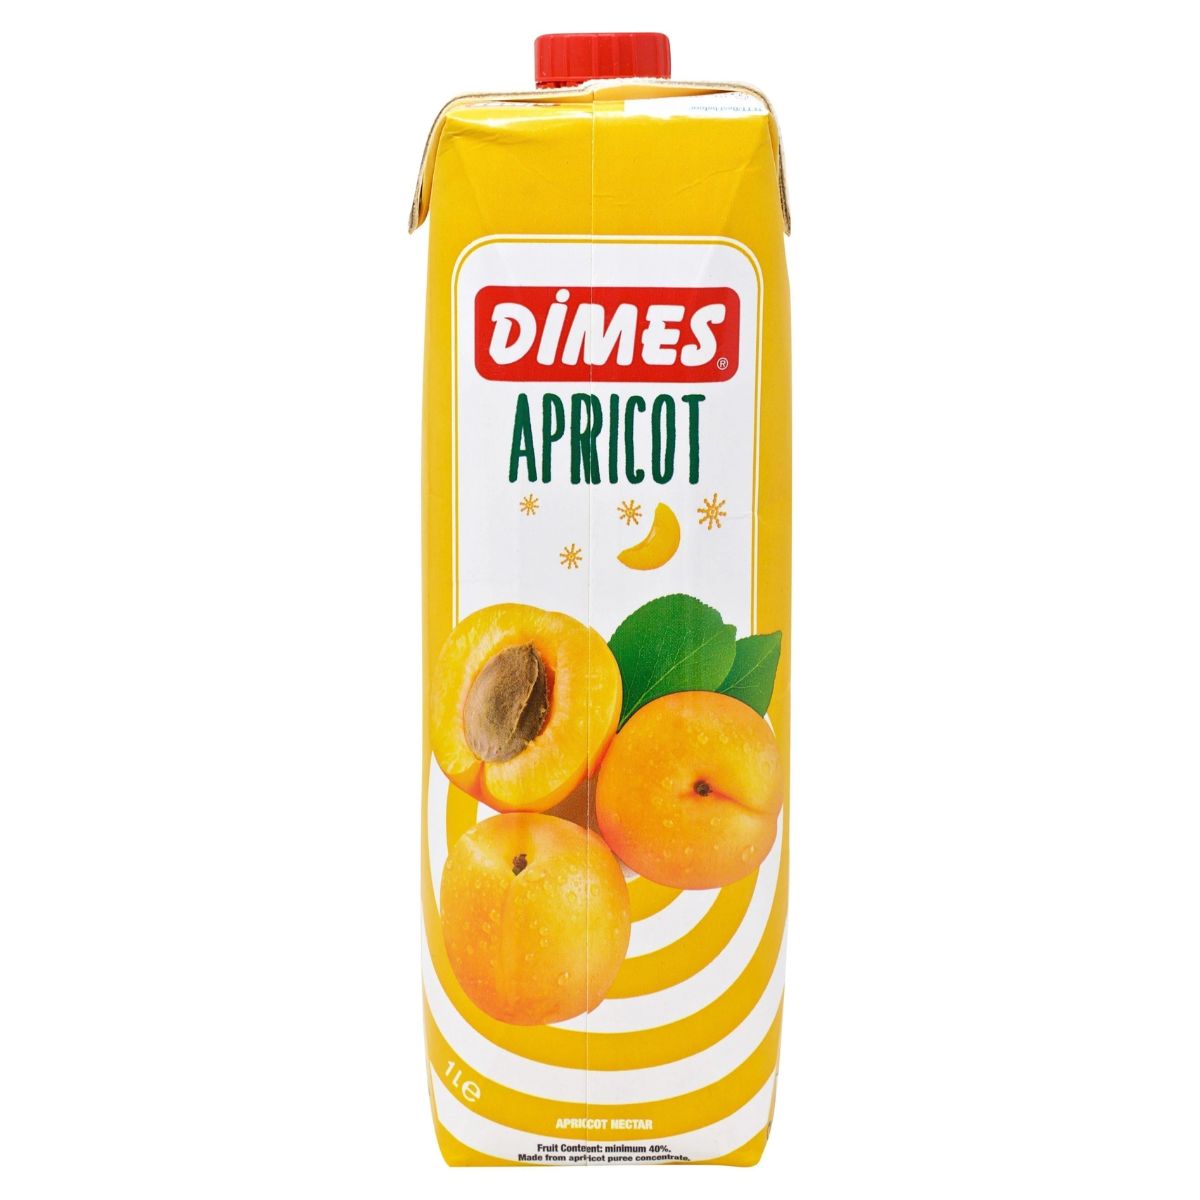 A carton of Dimes - Apricot - 1 litre on a white background.